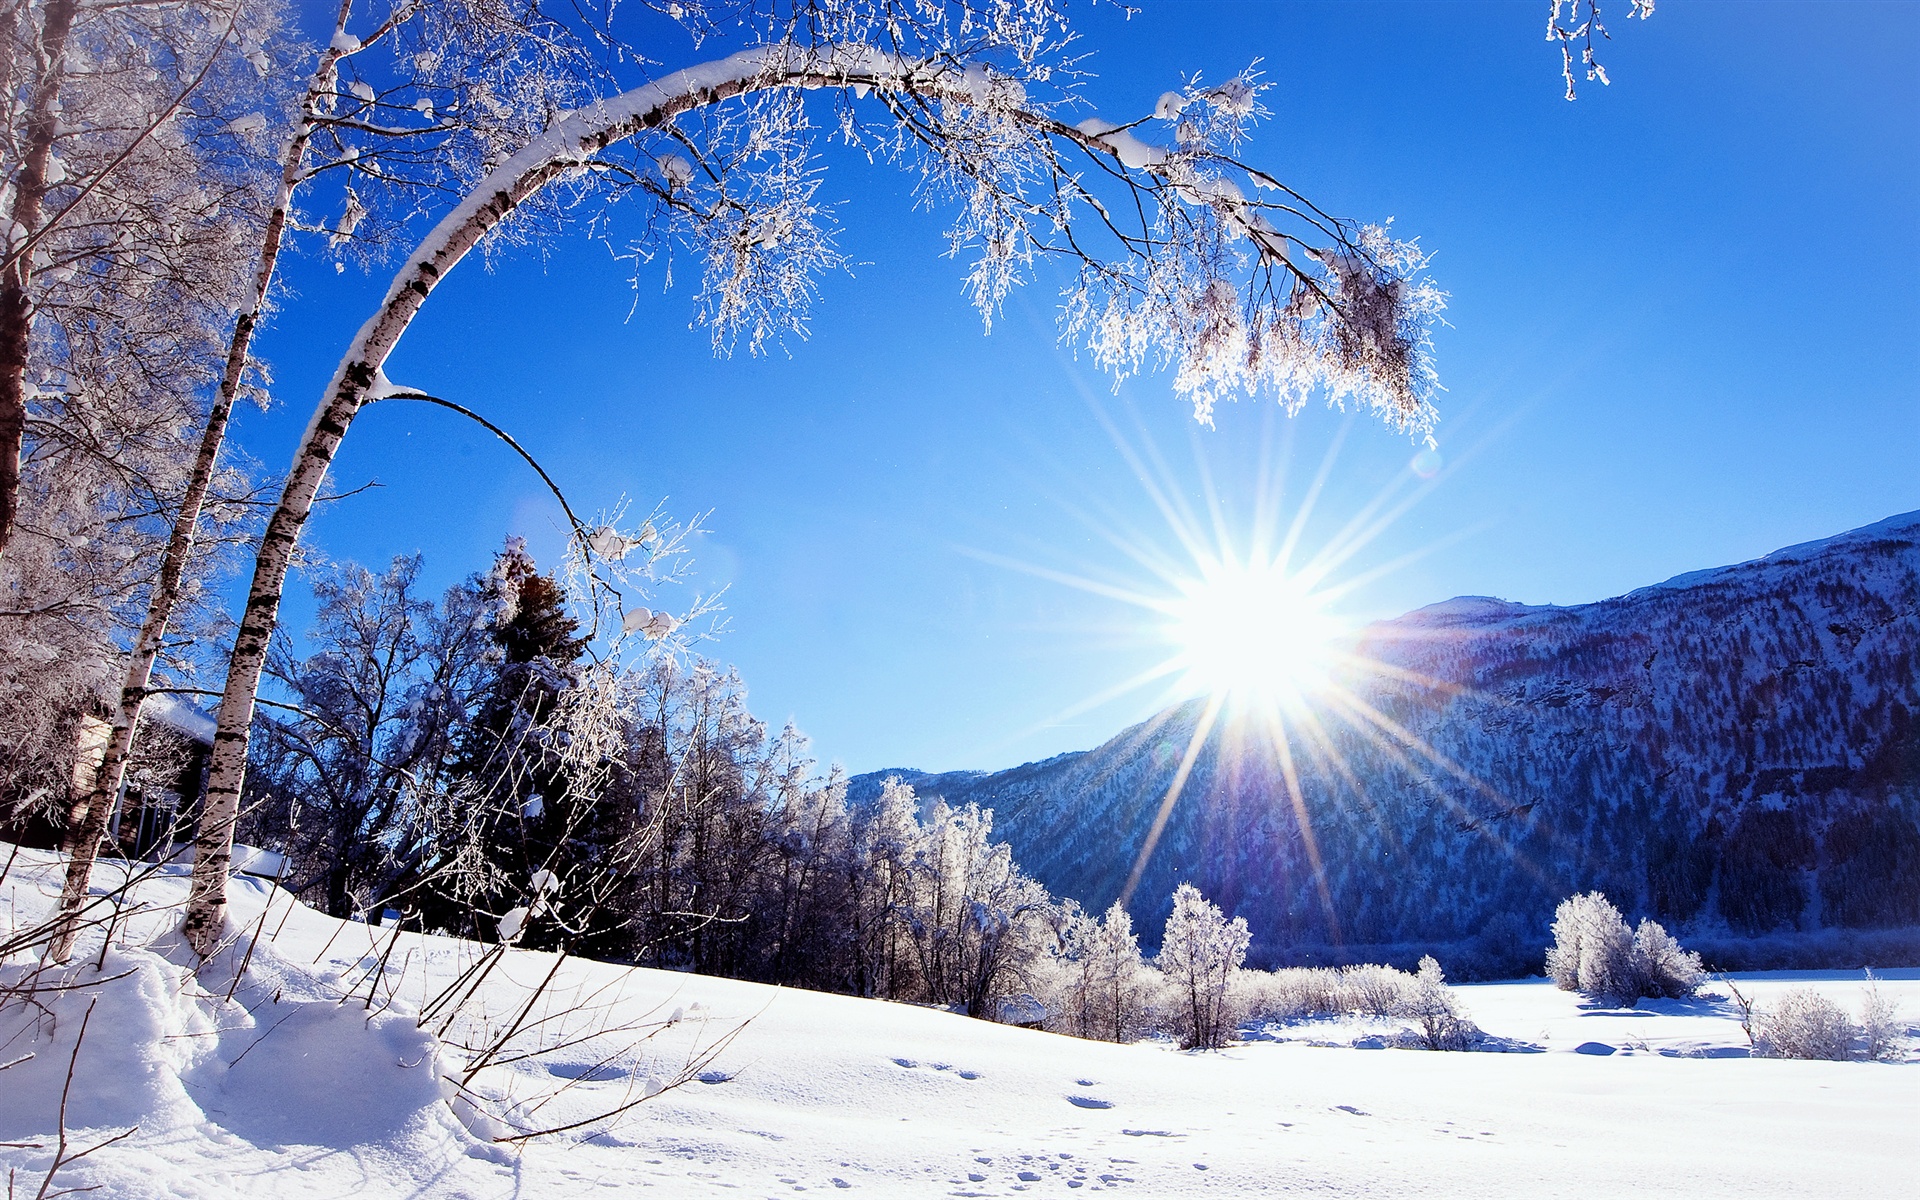 Winter, snow, mountains and trees, white scenery, dazzling sunshine wallpaper 1920x1200.